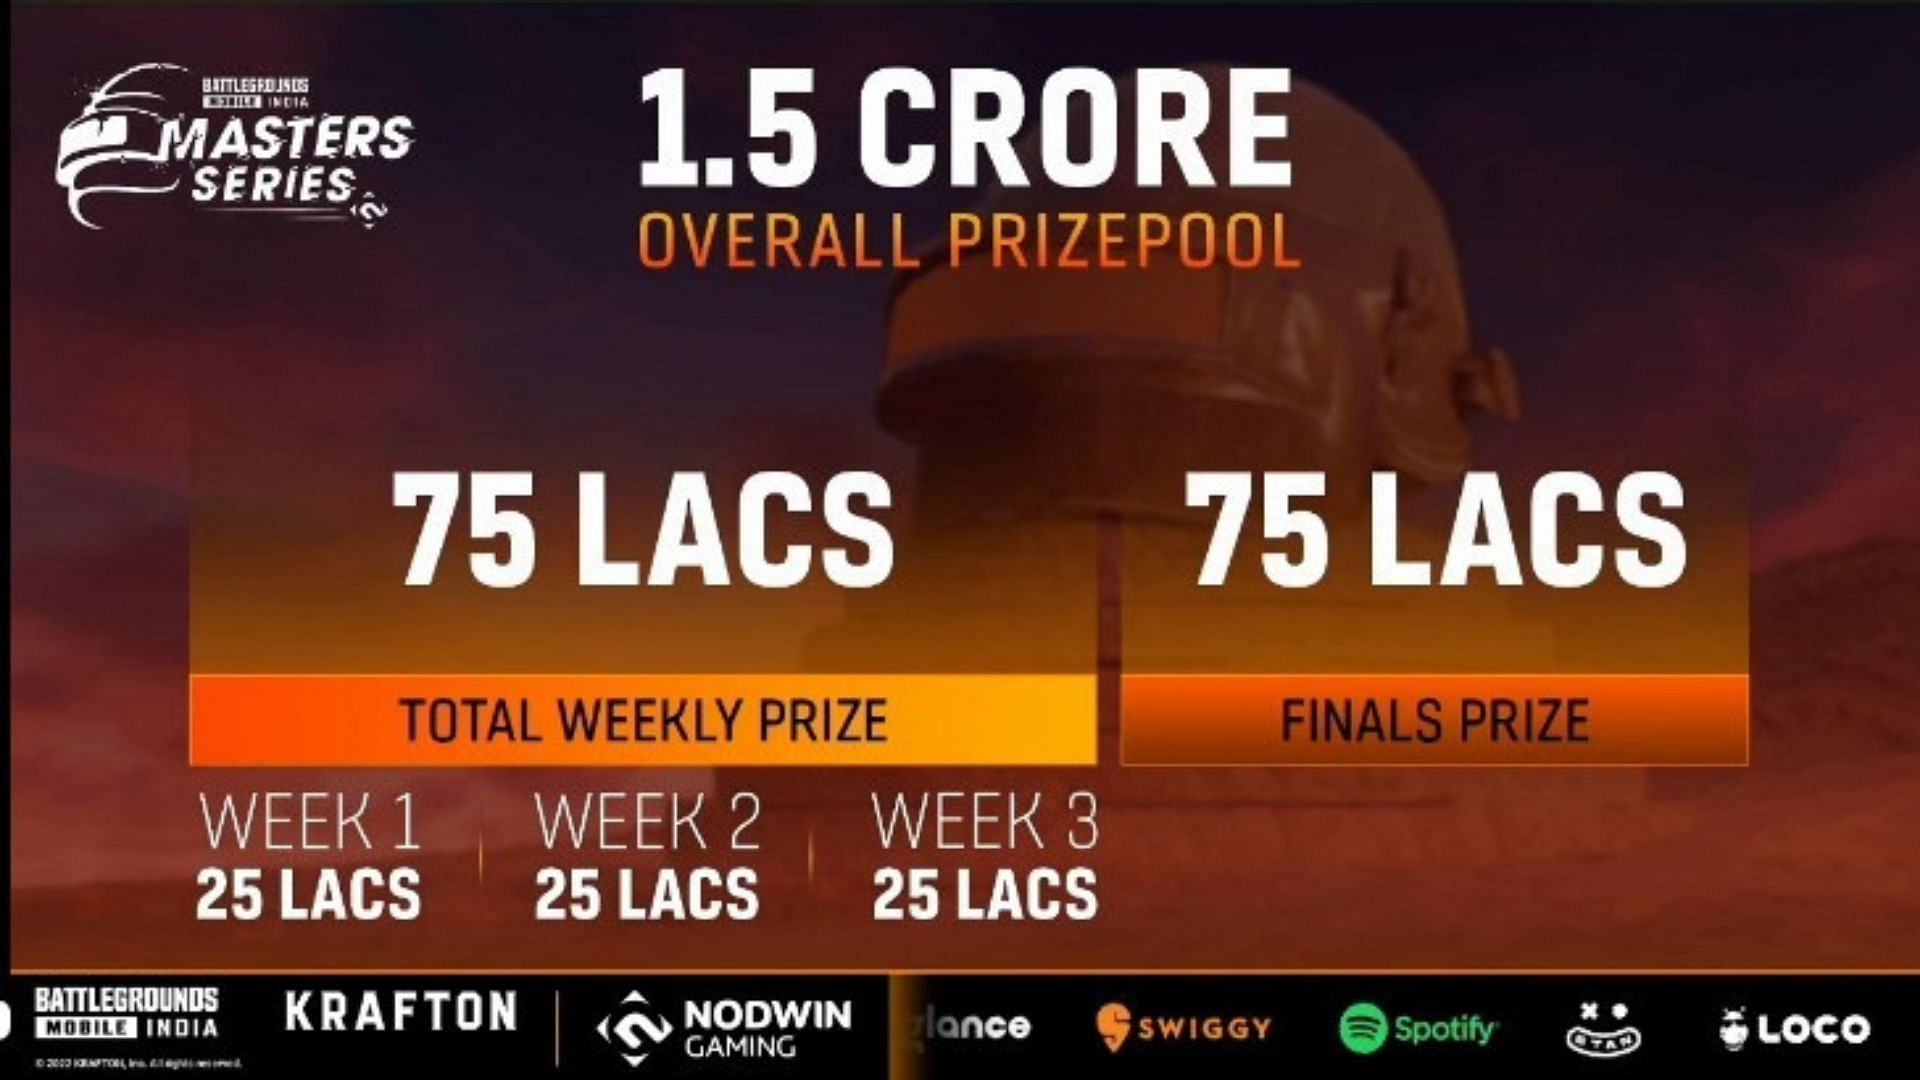 Each week of BGMI Masters Series League stage will features a prize pool of 25 lakhs (Image via Loco)